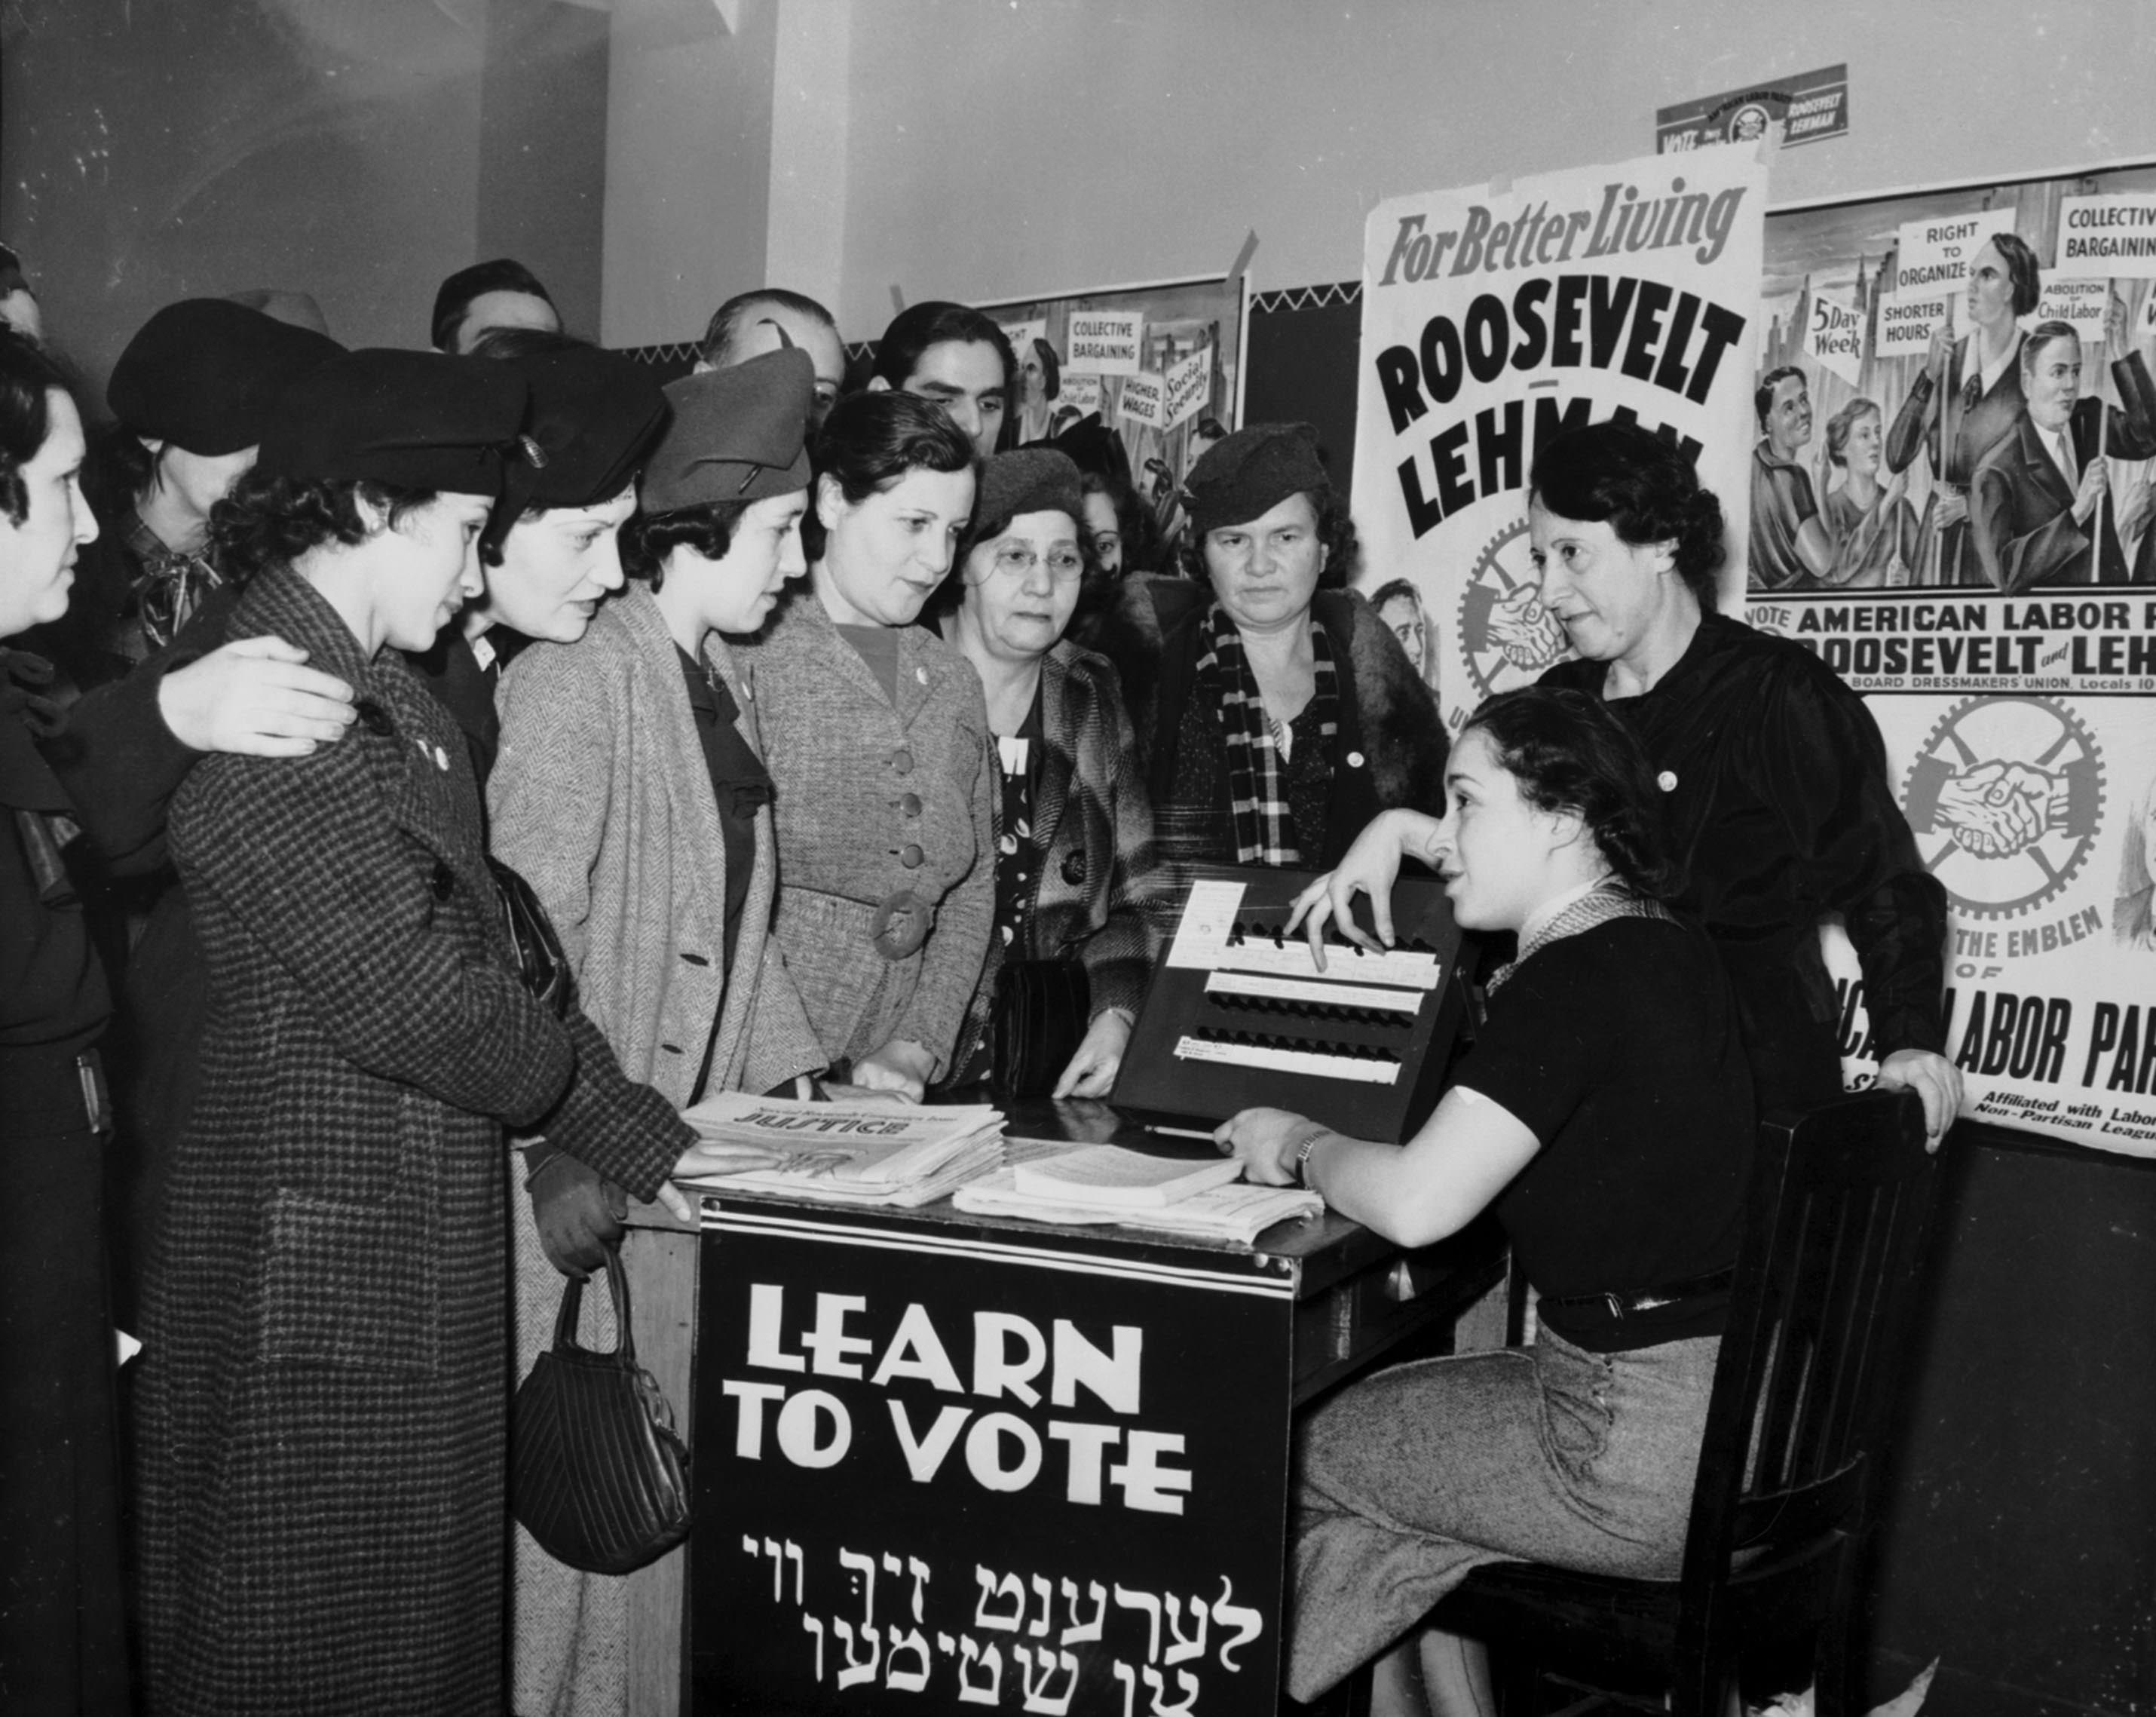 Women getting instructions on how to vote for the first time in NYC, US in 1928.